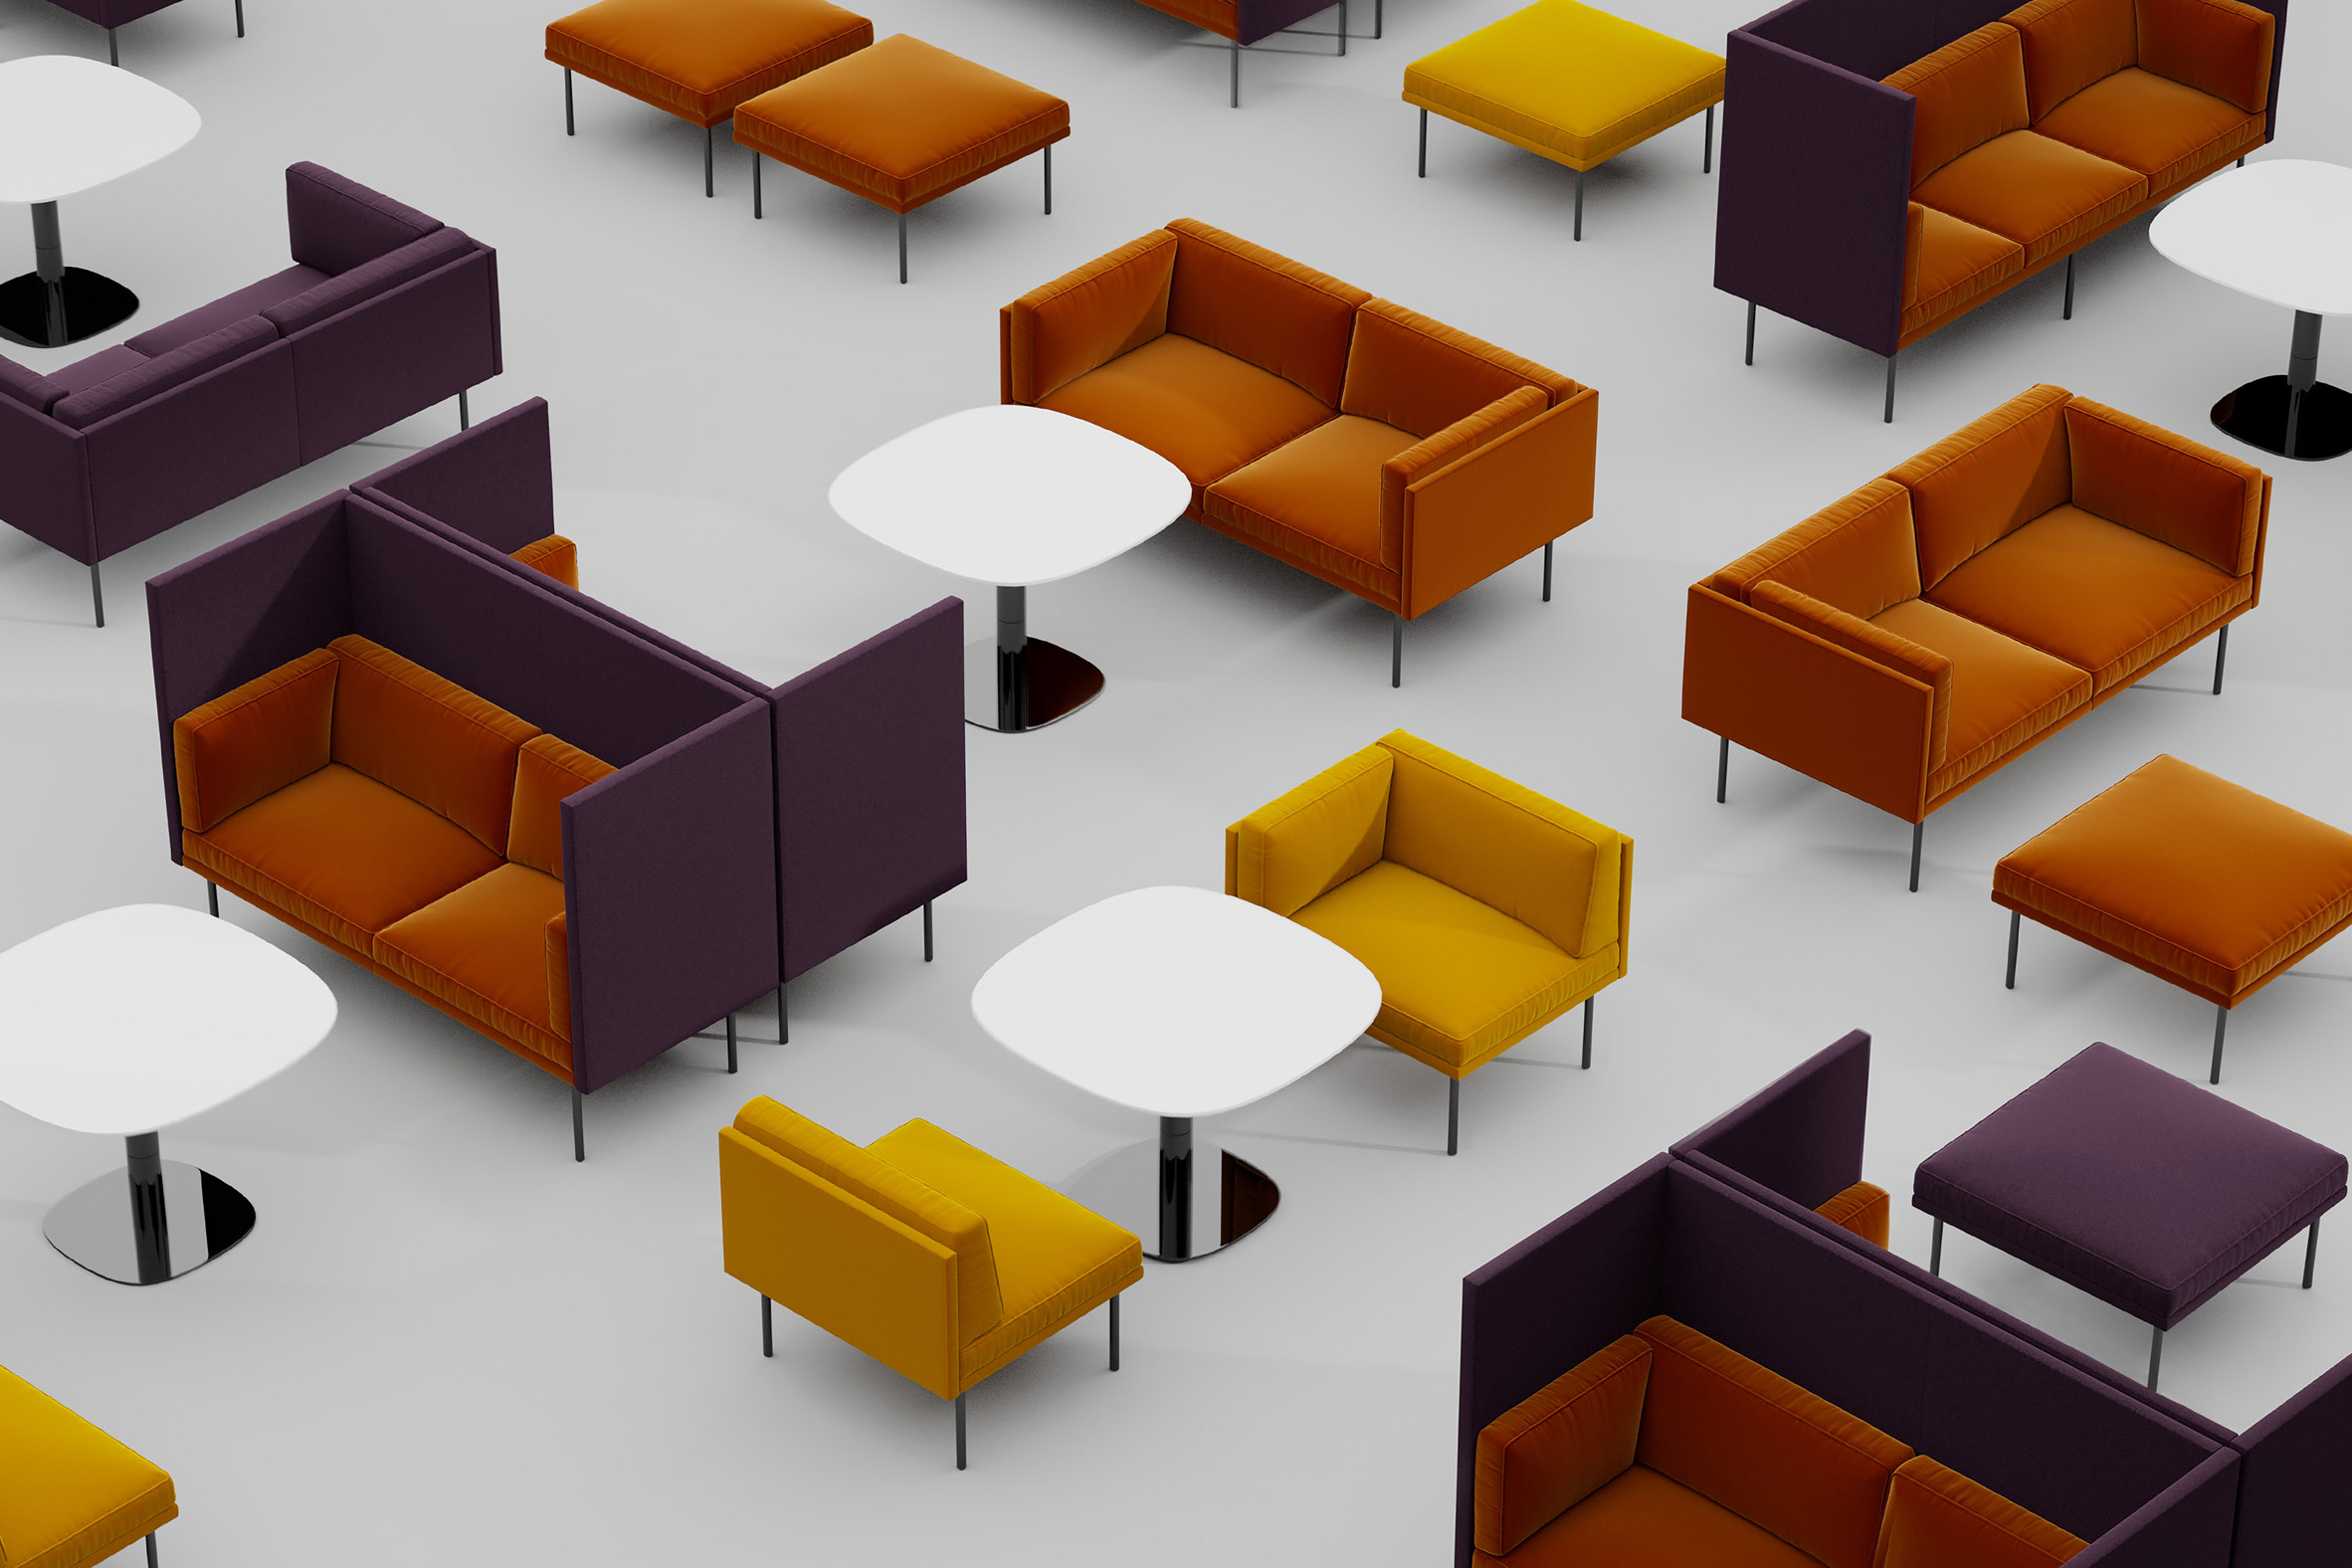 Purple, orange and yellow Mod Furniture collection by HBF